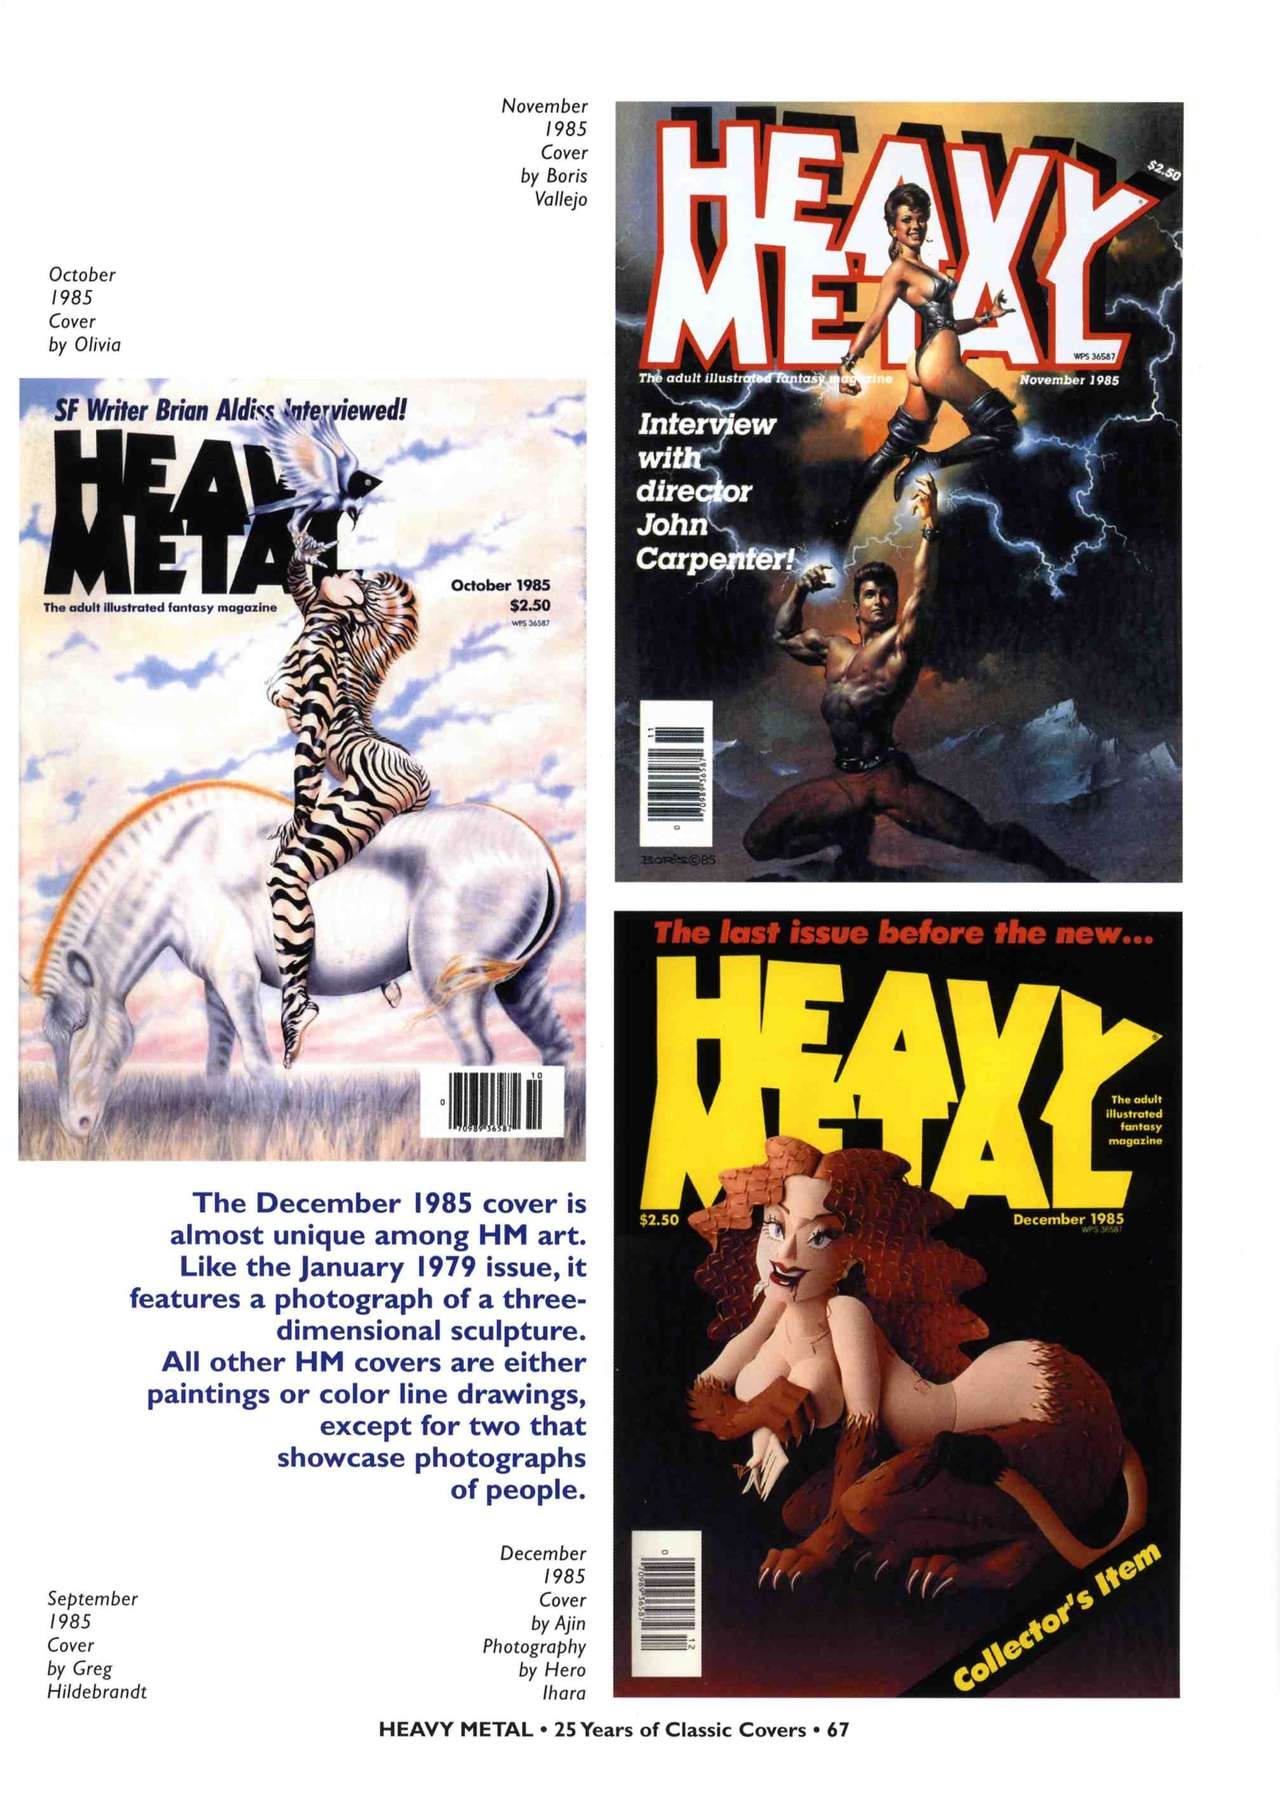 HEAVY METAL 25 Years of Classic Covers 72